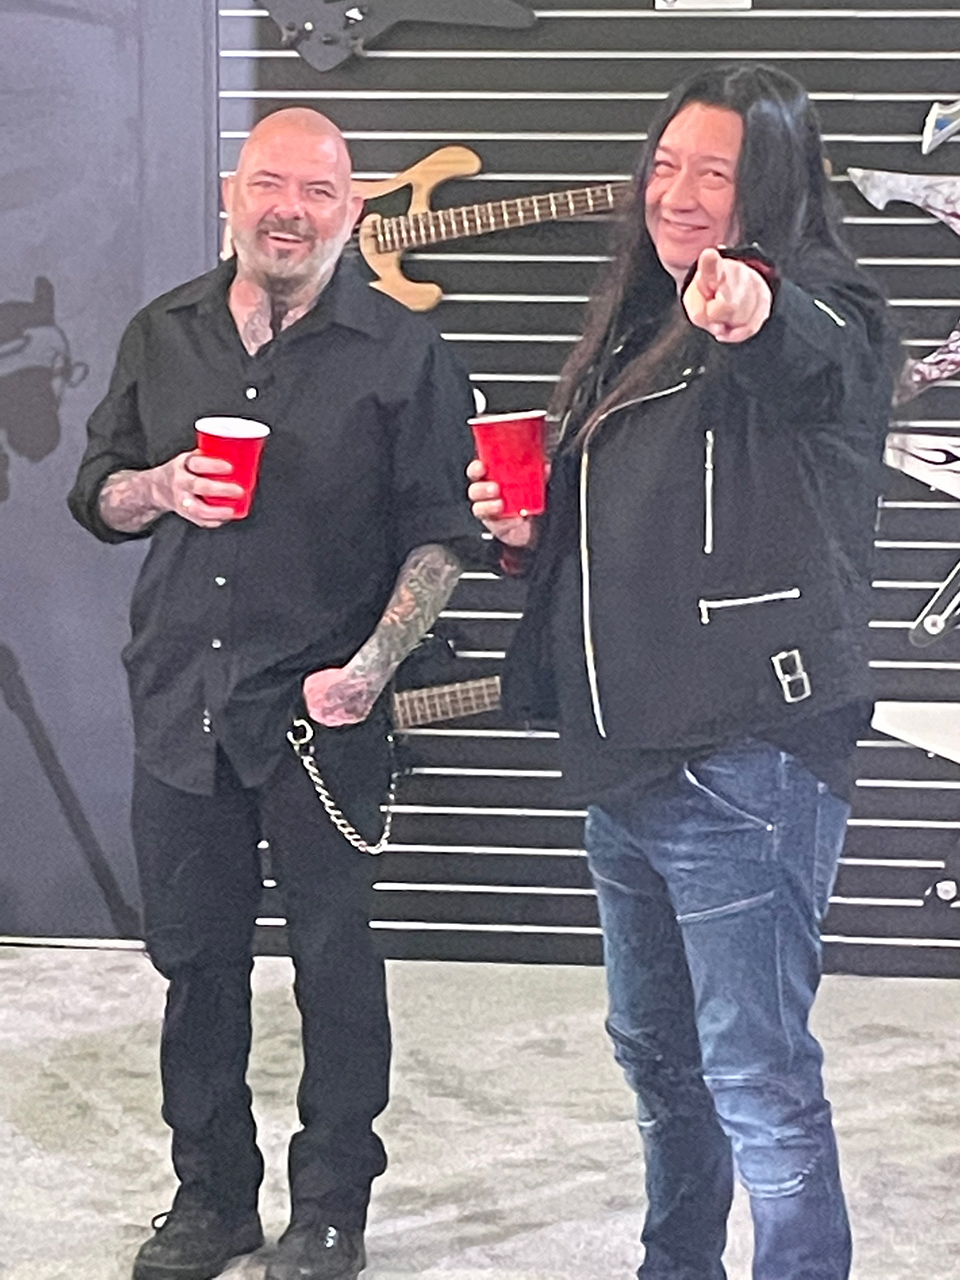 Dean guitars' Chris Cannella and Testament guitarist Eric Peterson enjoy some herbal tea in their red Solo cups.